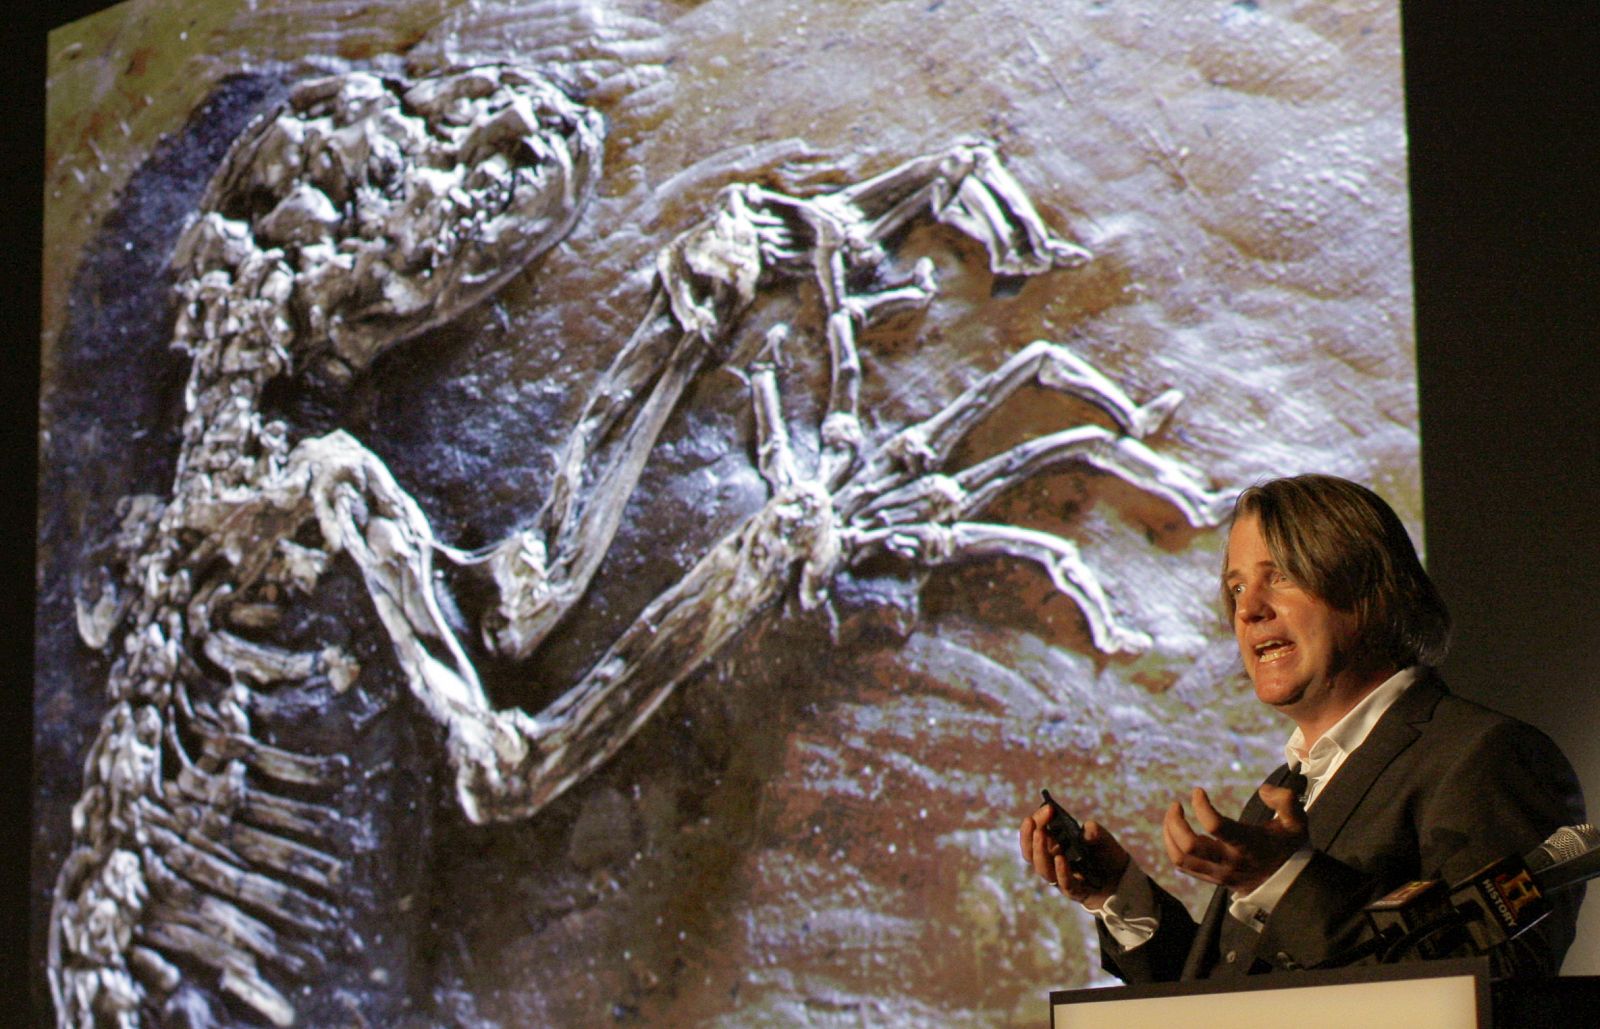 47 million year old fossilized primate specimen known as " Ida" unveiled at New York's Museum of Natural History